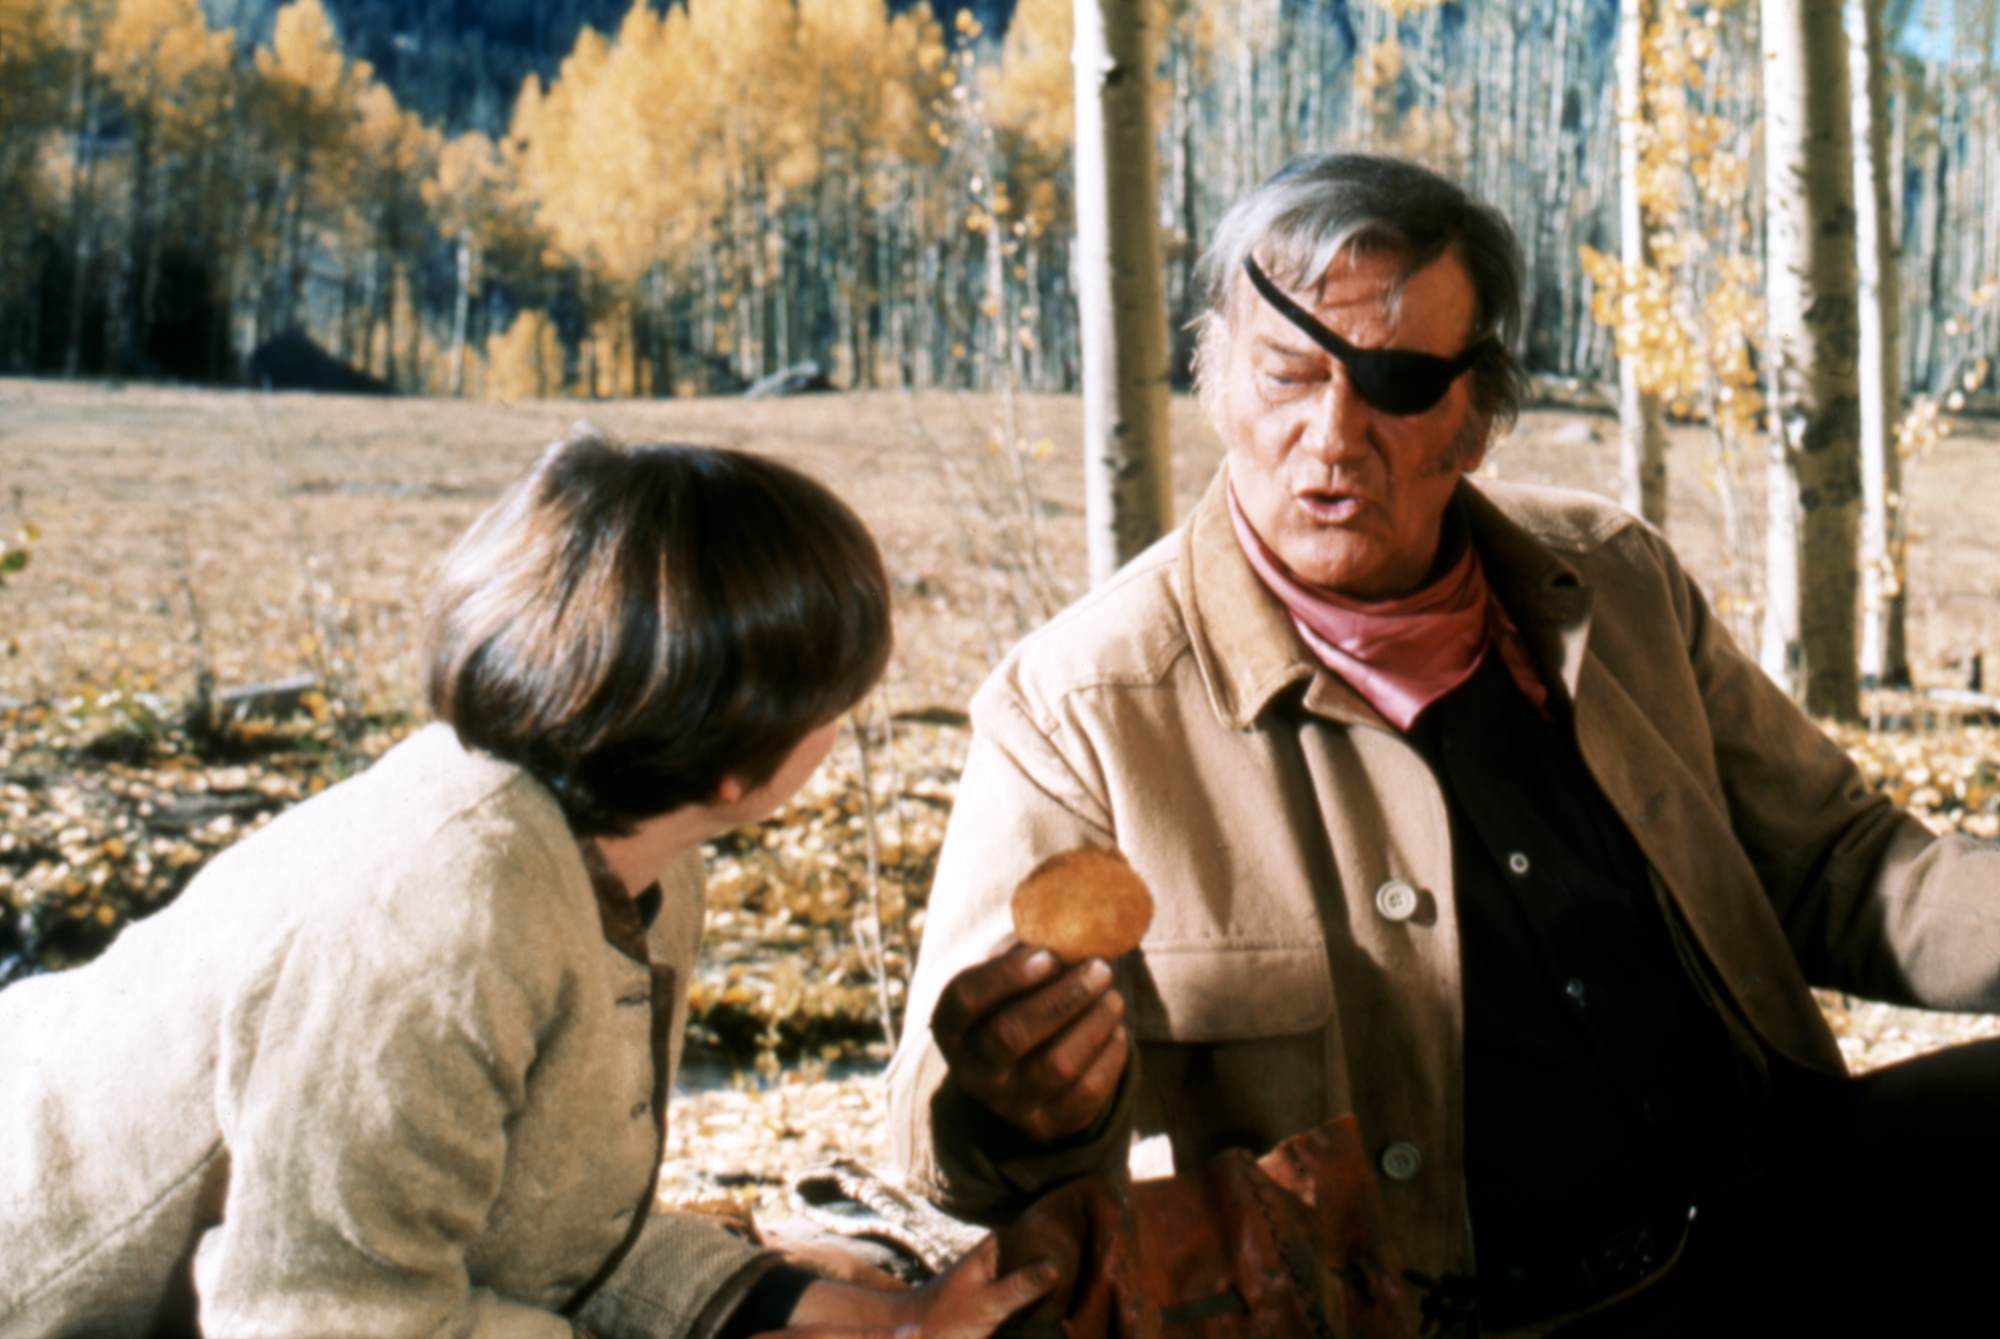 'True Grit' Kim Darby as Mattie Ross and John Wayne as Rooster Cogburn sitting in the woods.